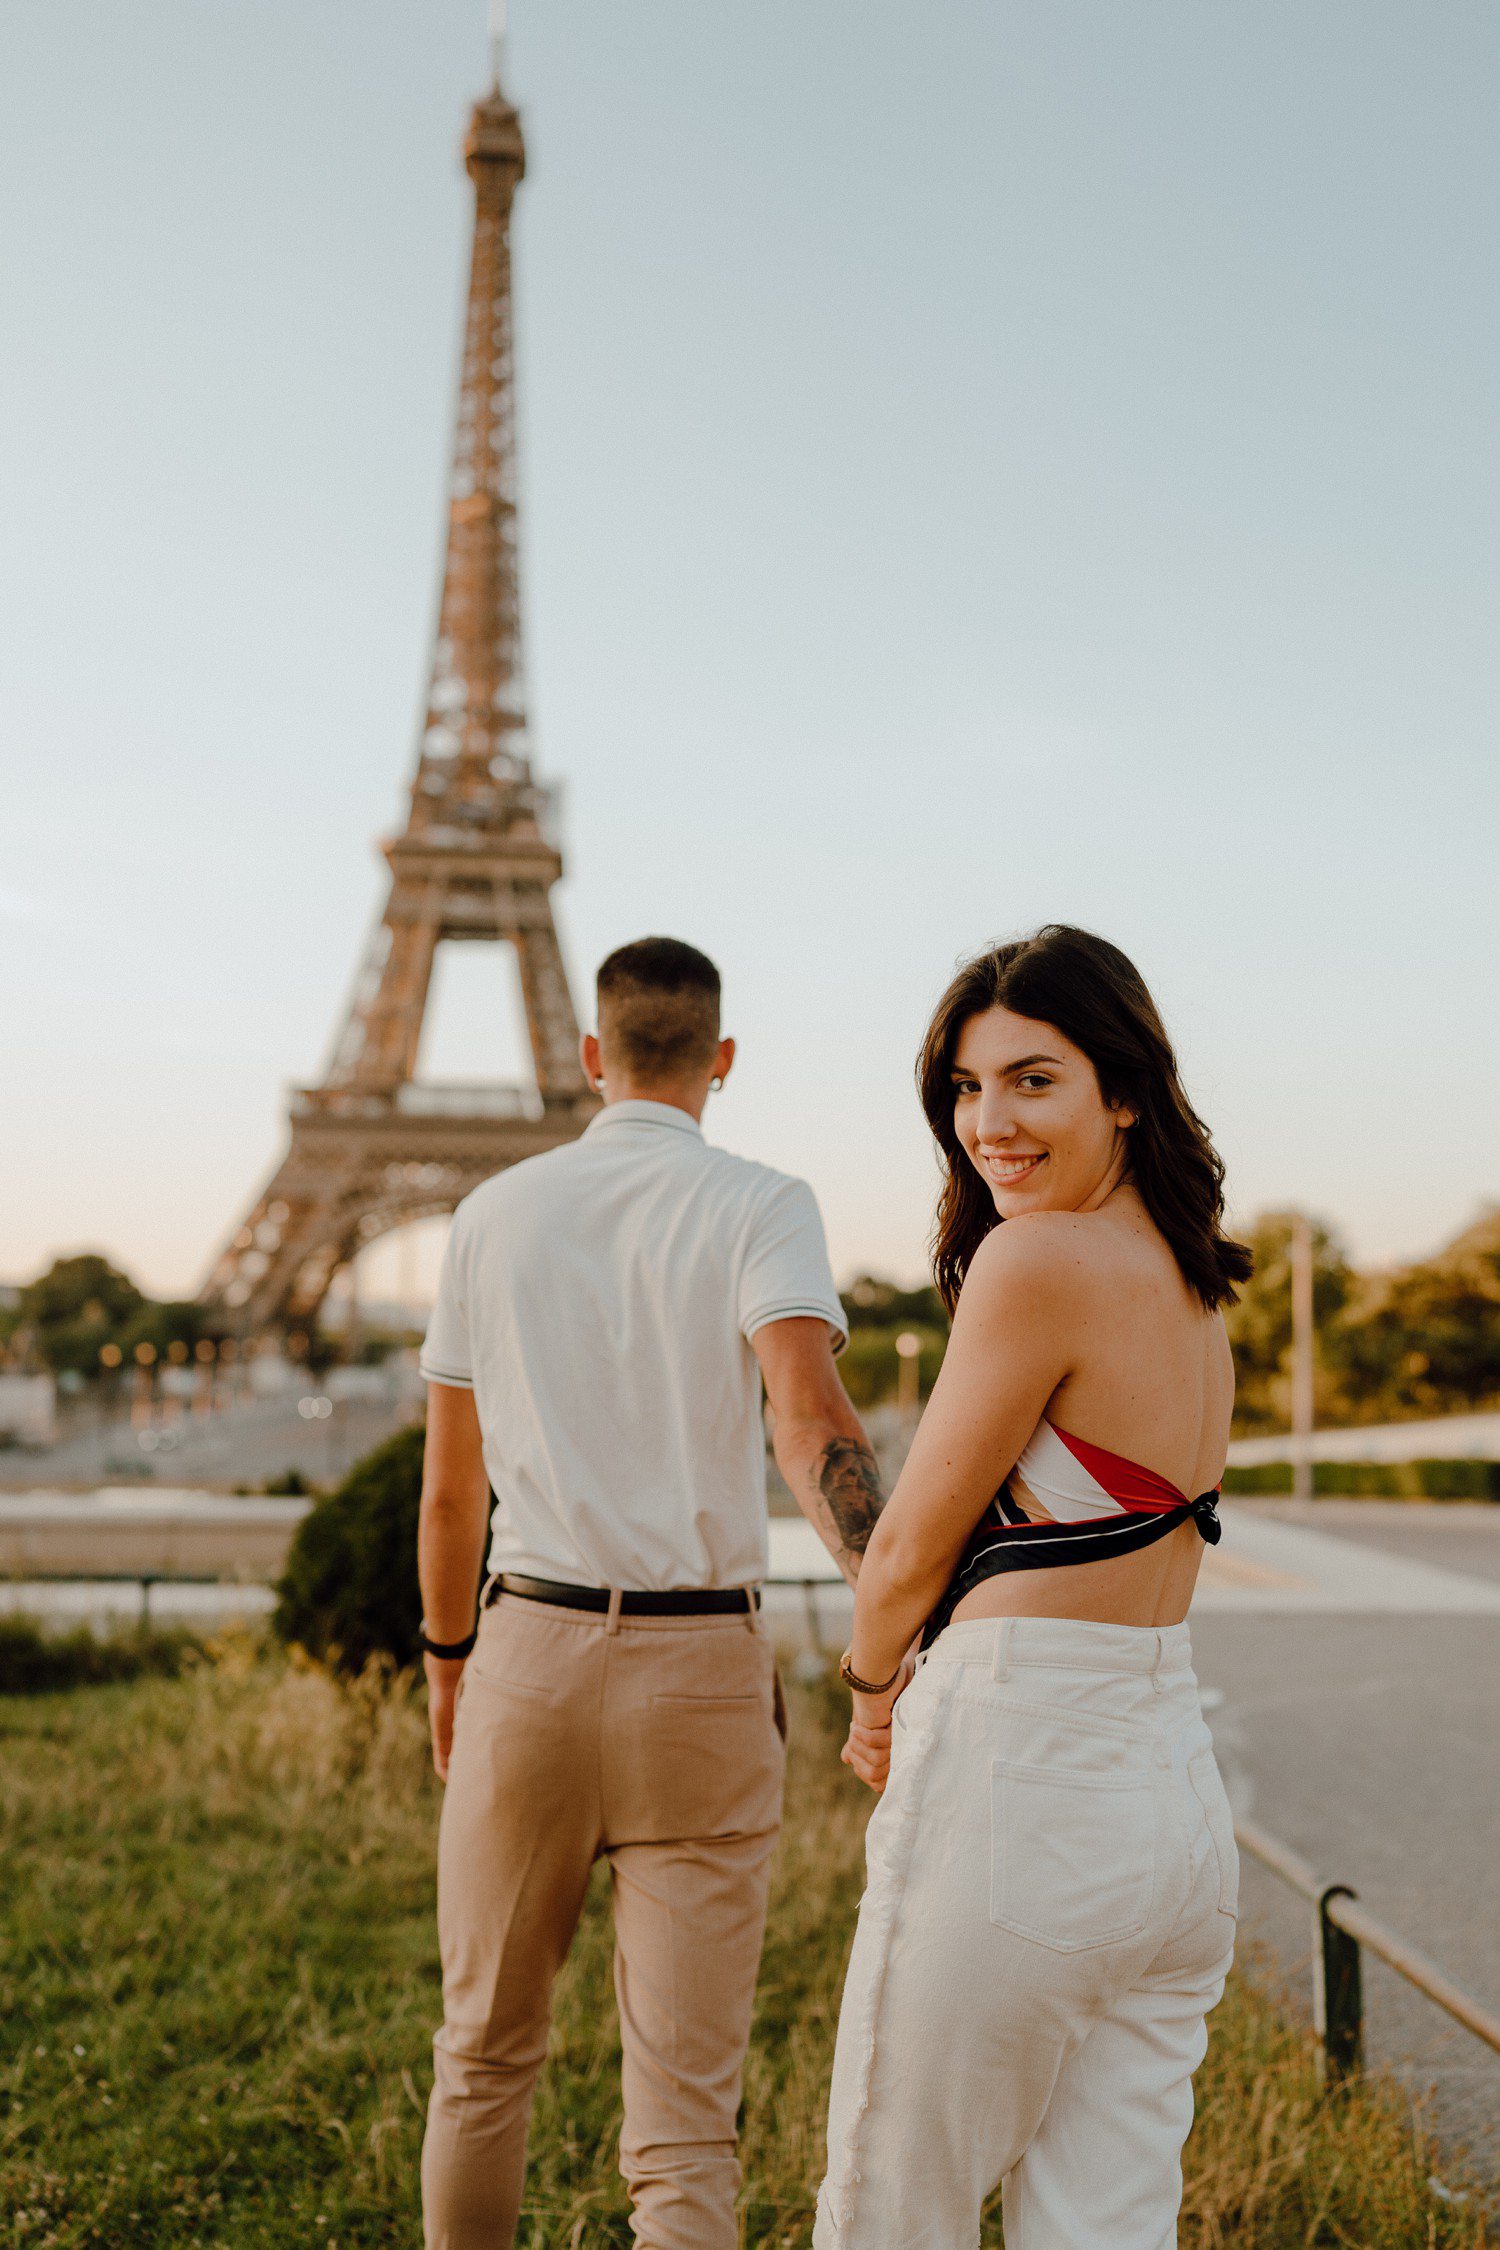 Couples-Session-in-Paris-France-at-The-Eiffel-Tower-6